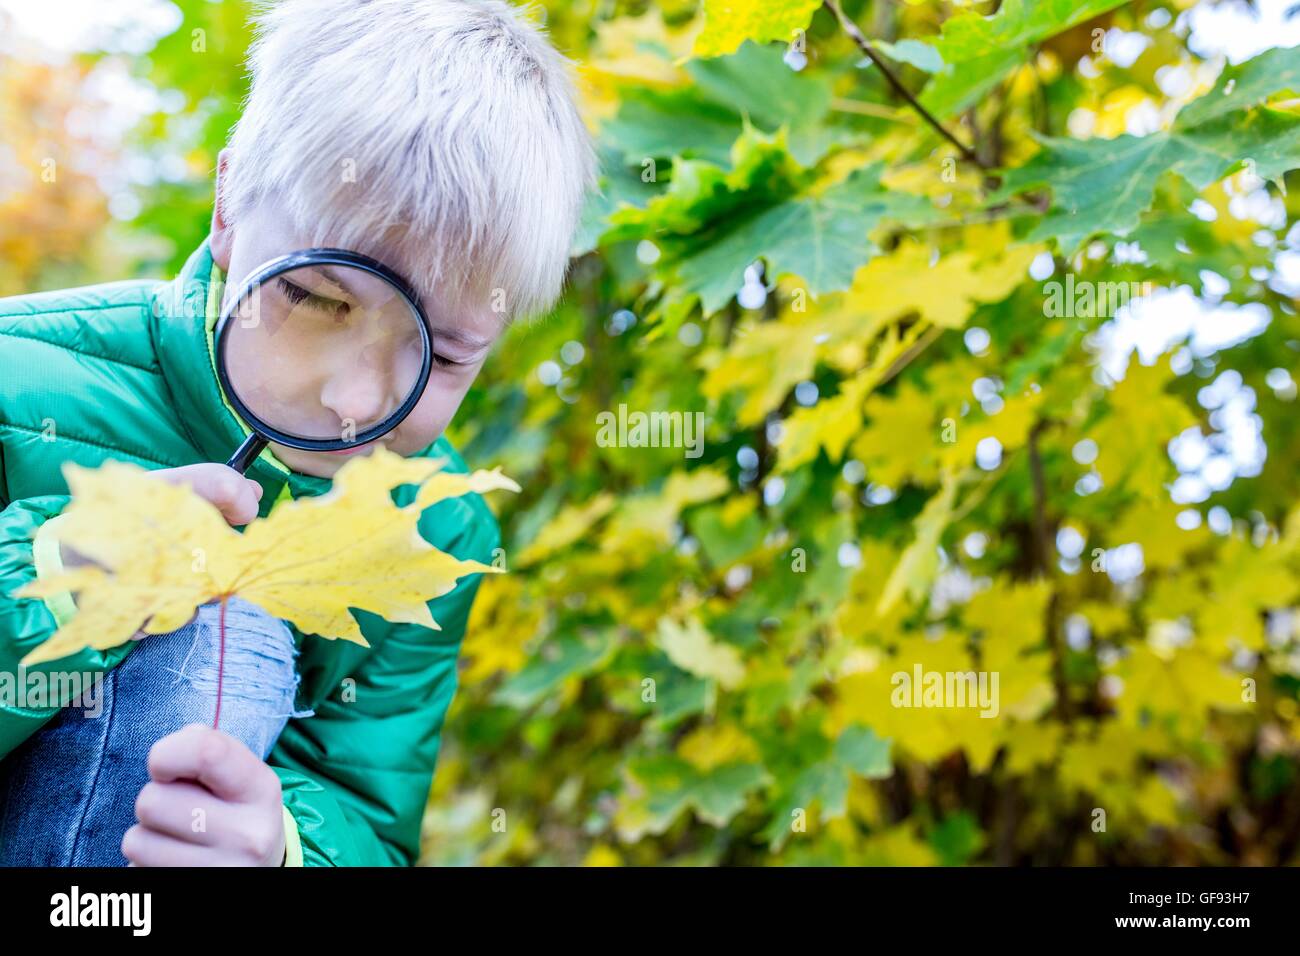 MODEL RELEASED. Boy examining autumn leaf with magnifying glass. Stock Photo